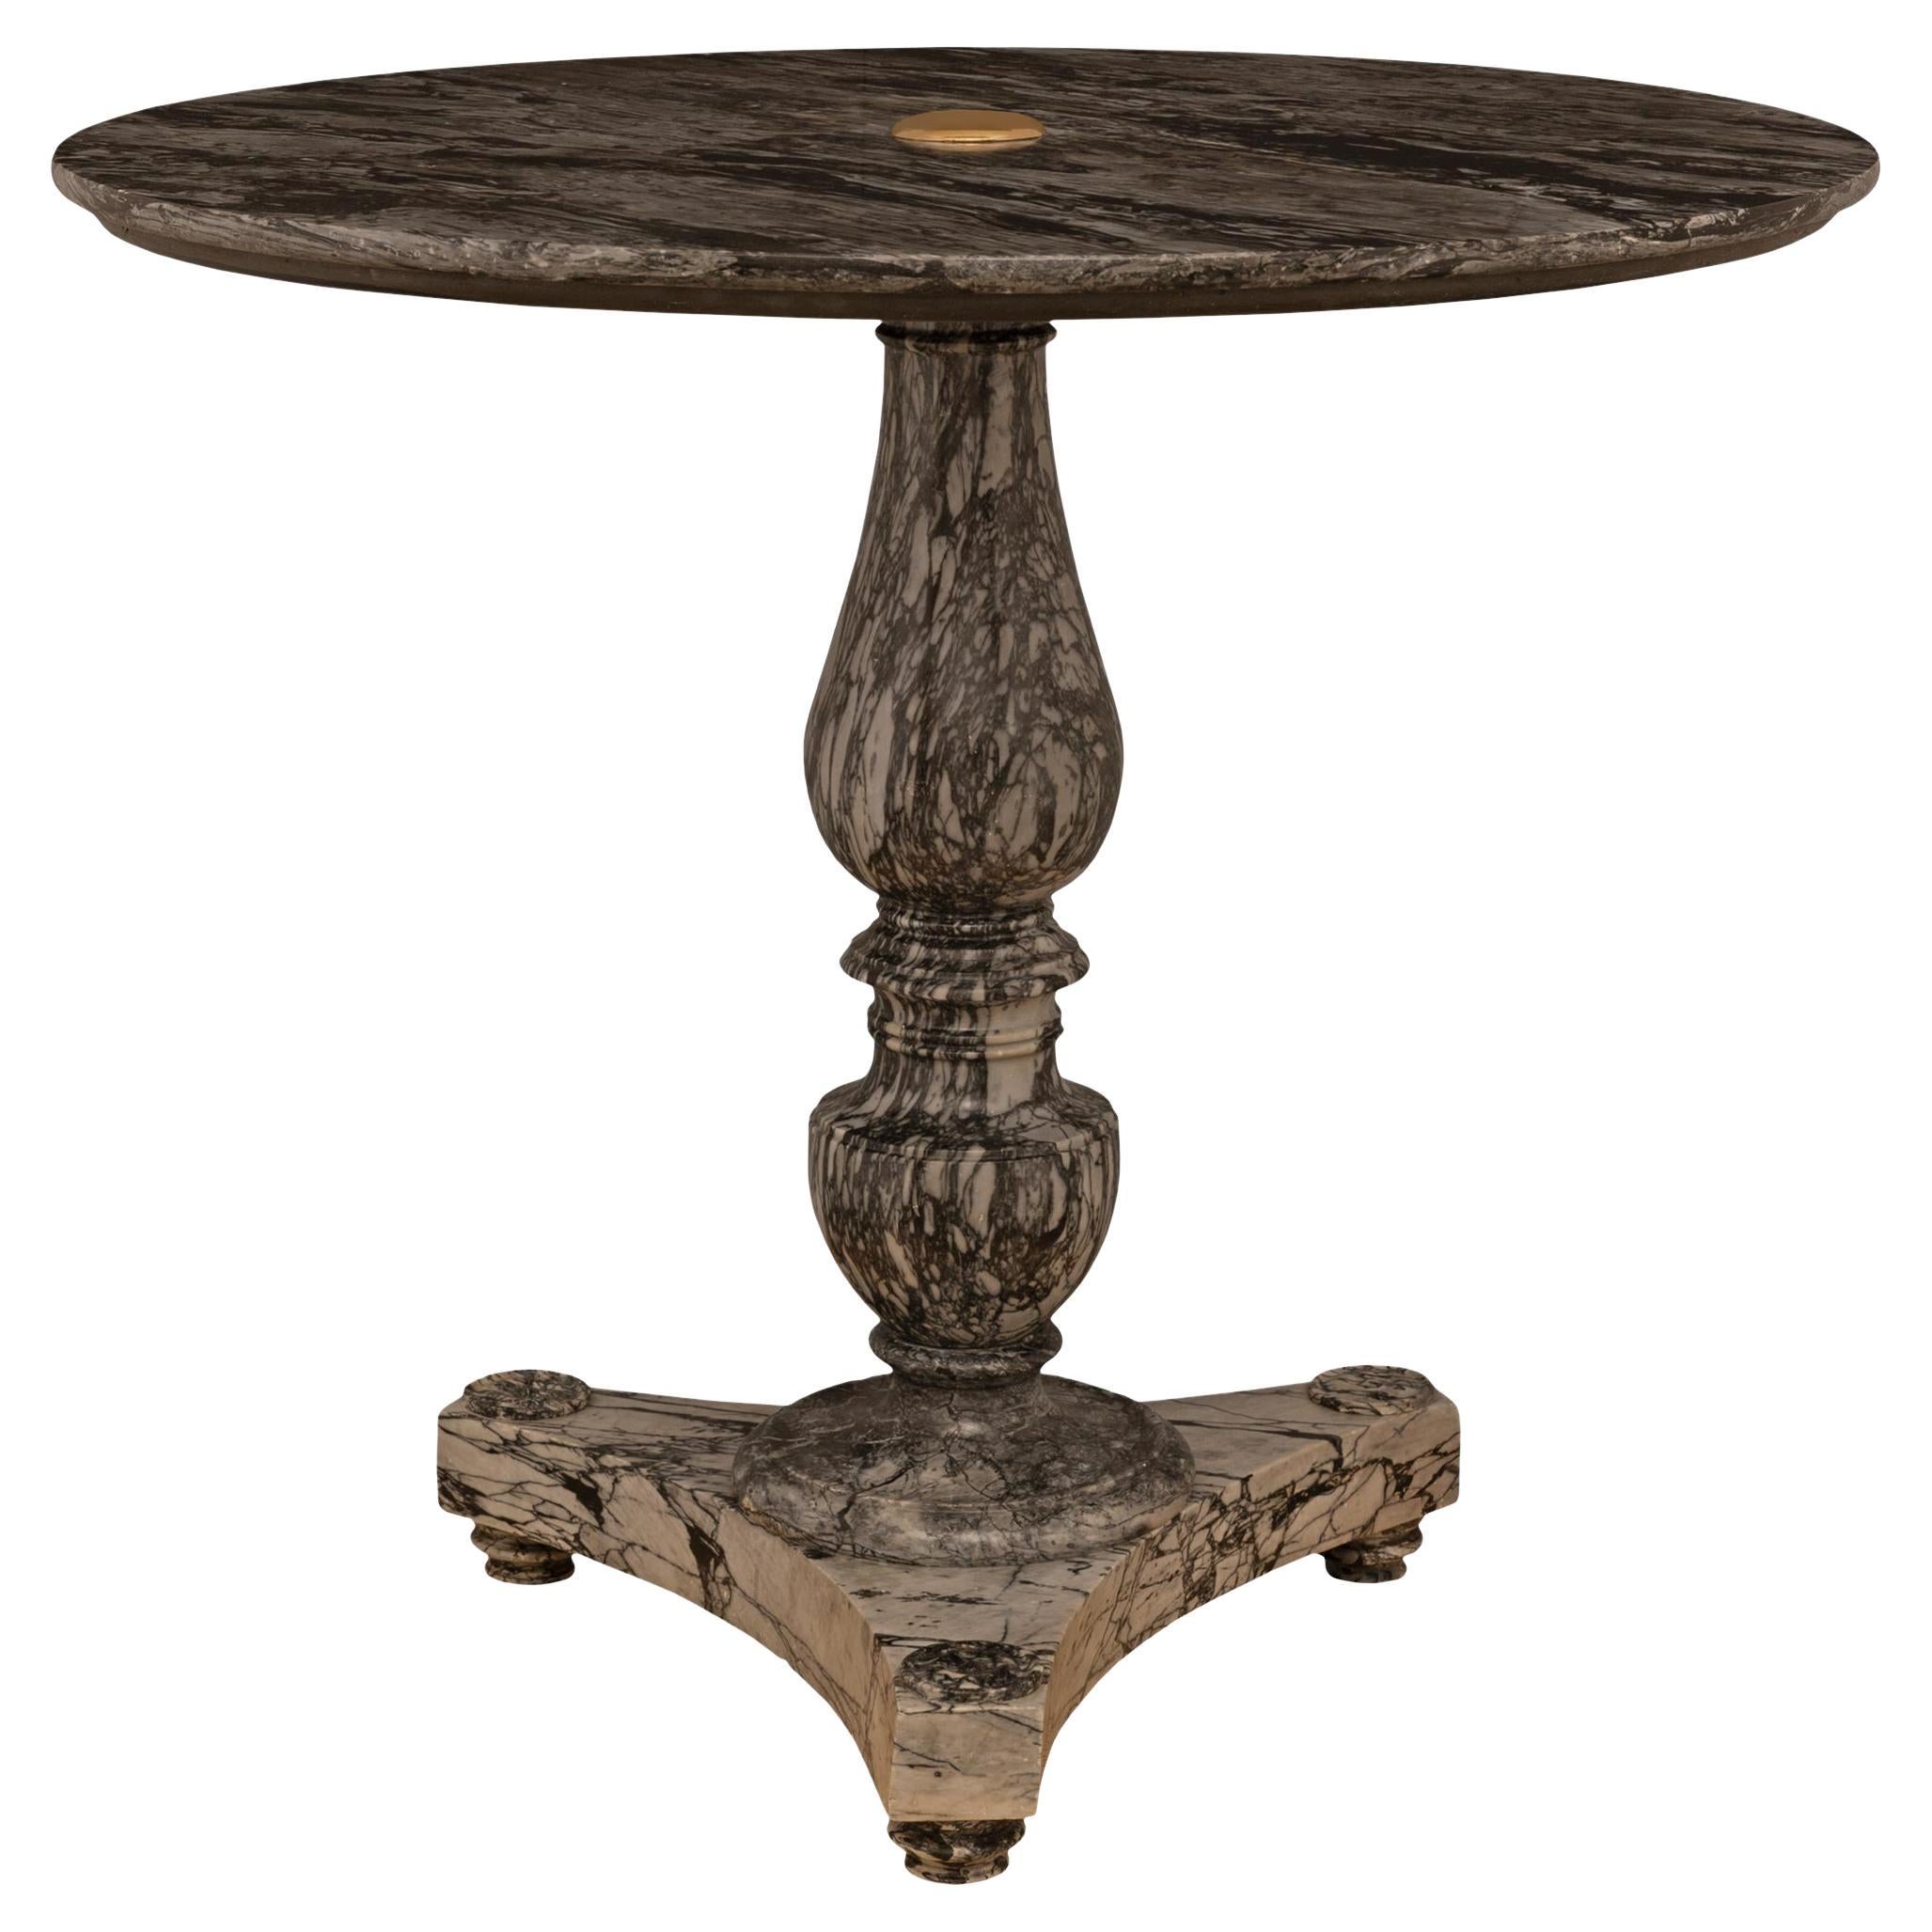 A French 19th century Charles X period center table